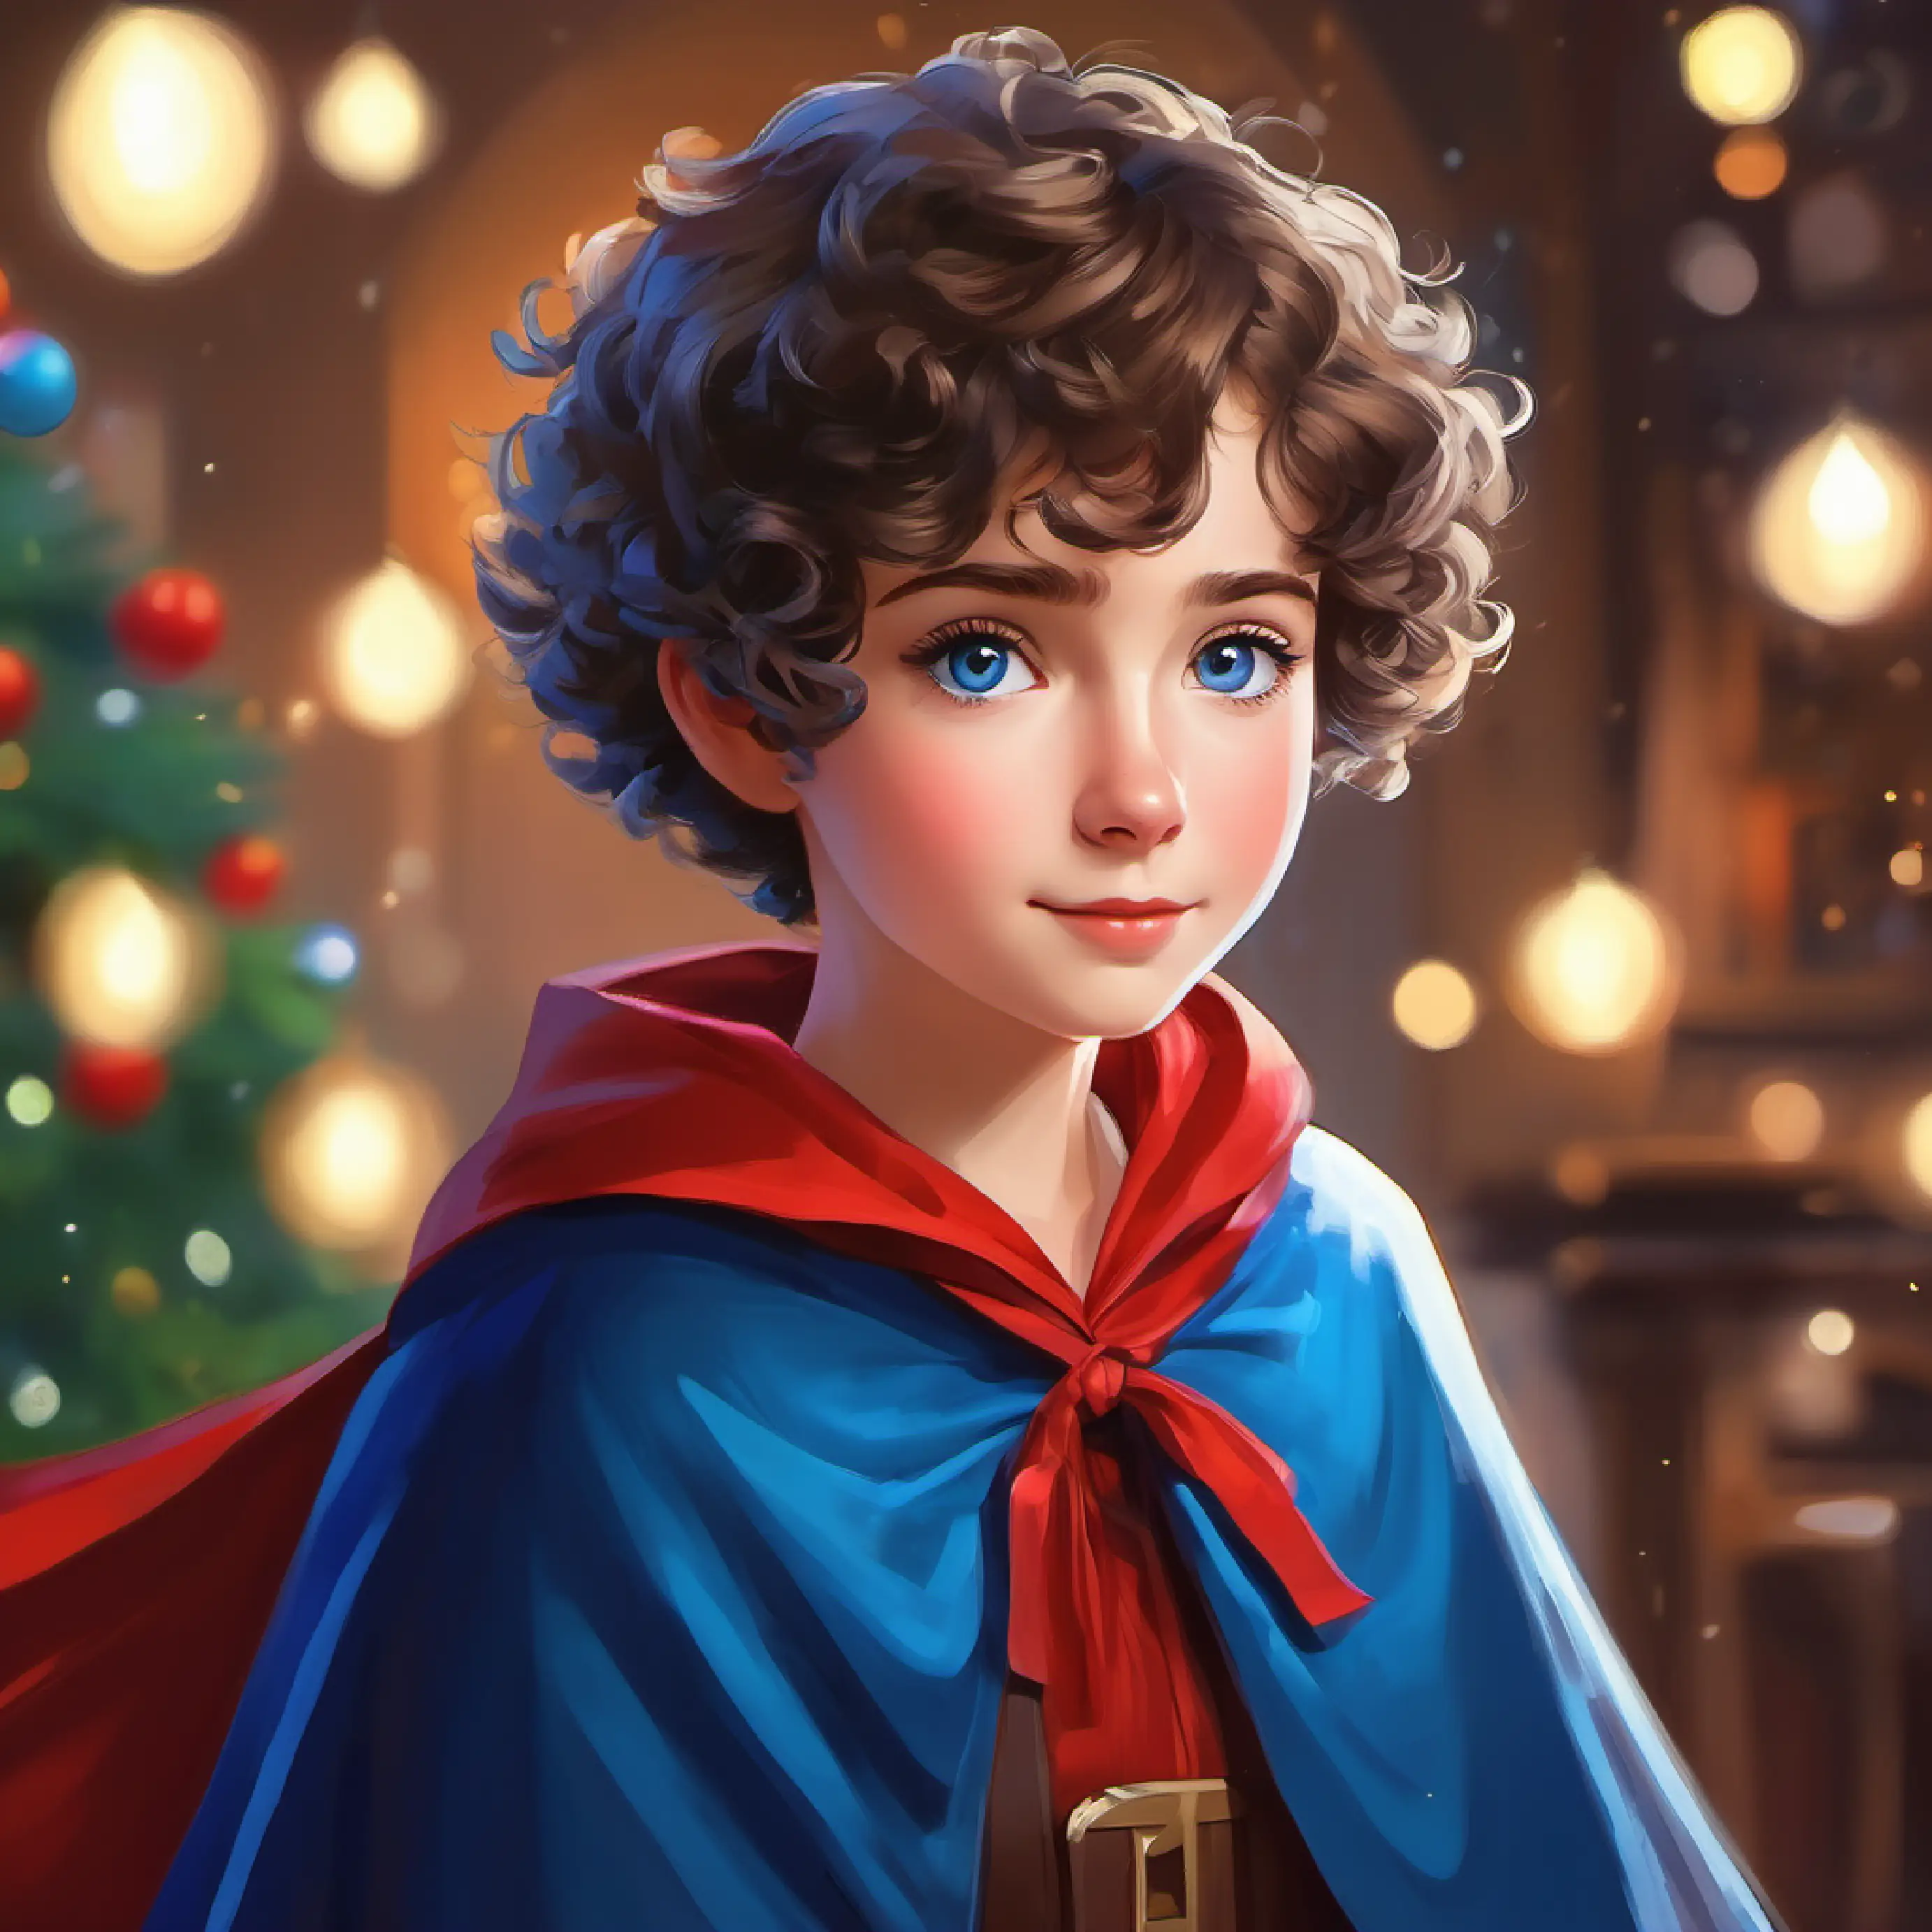 Promising conclusion, Short, curly hair, bright blue eyes, wearing a cape' realization